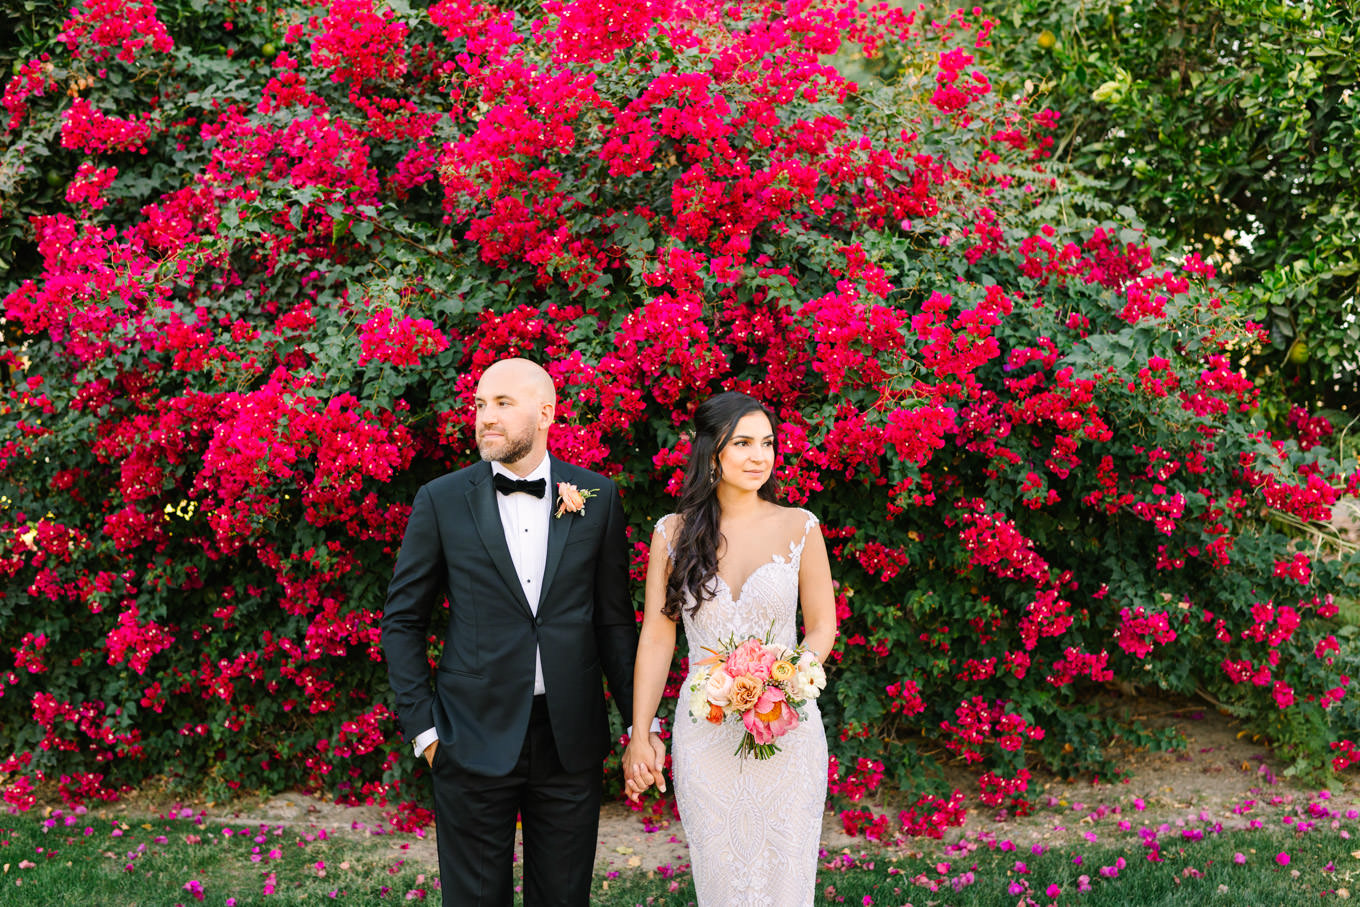 Bride and Groom photo | Pink Bougainvillea Estate wedding | Colorful LA wedding photography | #bougainvilleaestate #palmspringswedding #palmspringsweddingvenue #palmspringsphotographer Source: Mary Costa Photography | Los Angeles